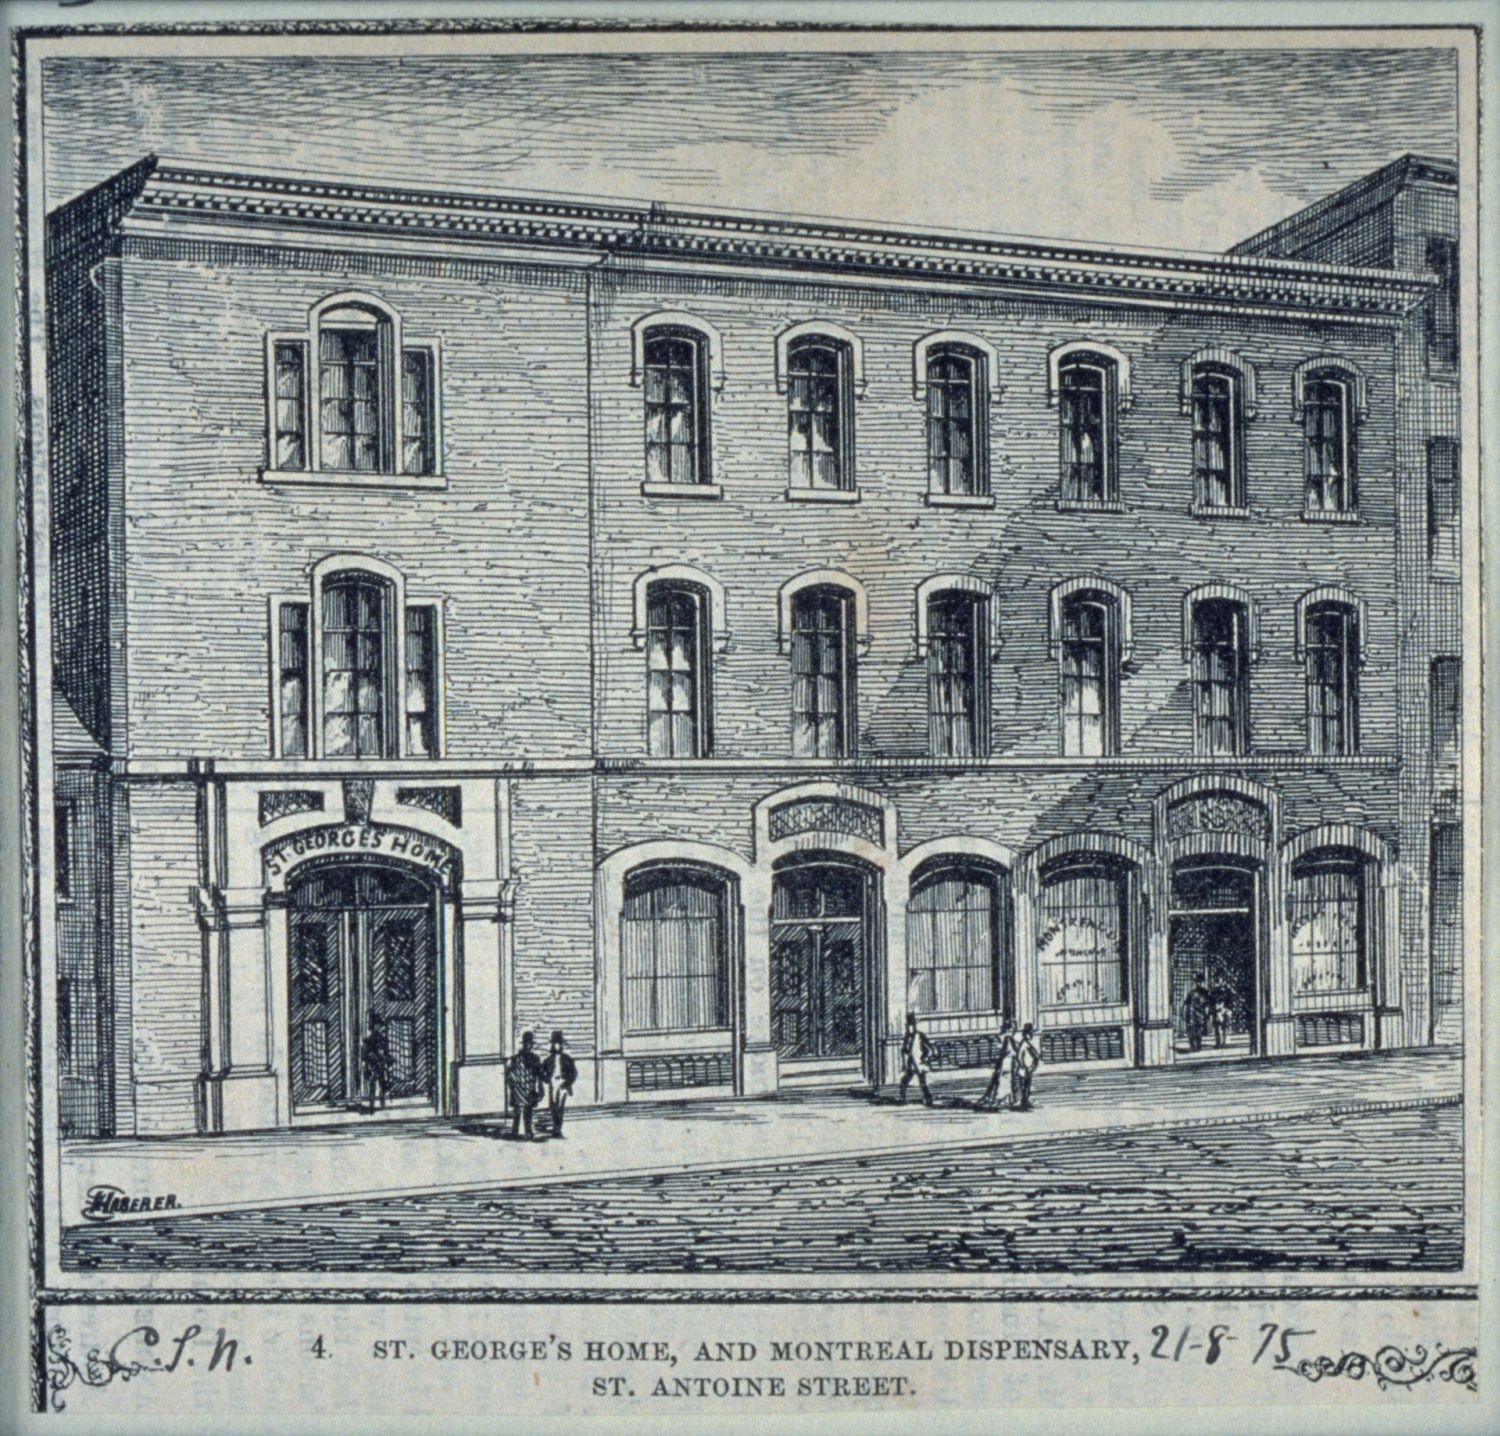 St. George's Home, and Montreal Dispensary, ST. Antoine Street, 1875, Albums Massicotte, BAnQ.